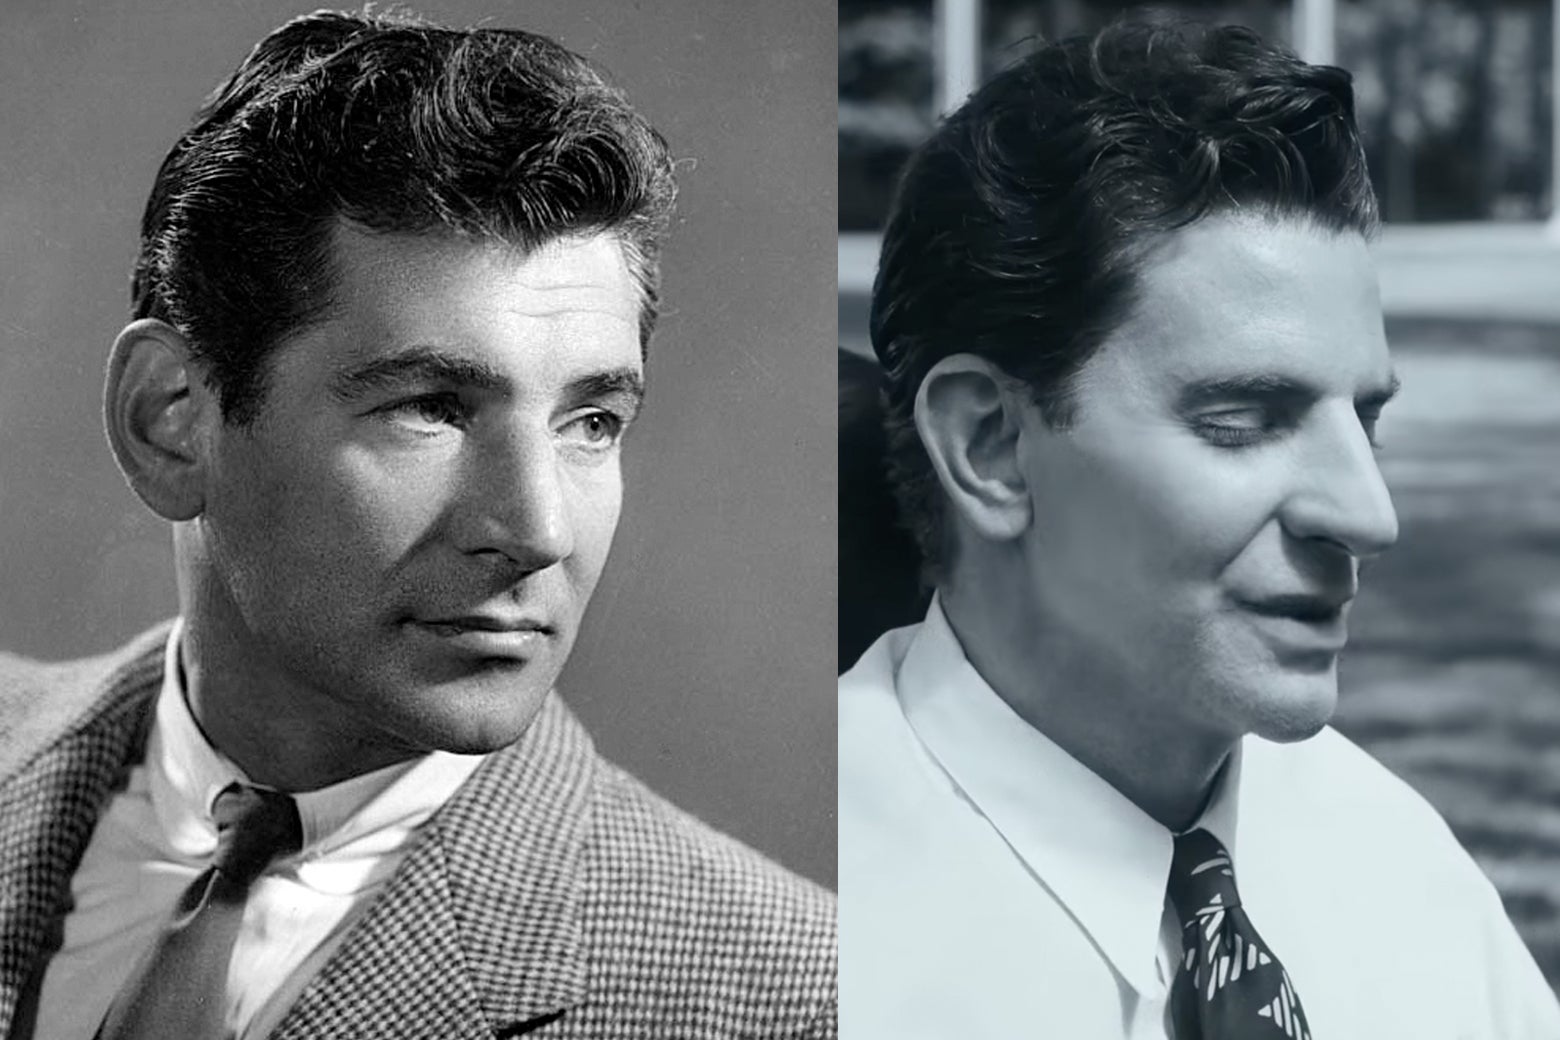 A side-by-side shows the two men looking sharp in curly but neatly combed hair, a shirt, and a tie. Both have prominent, handsome noses.